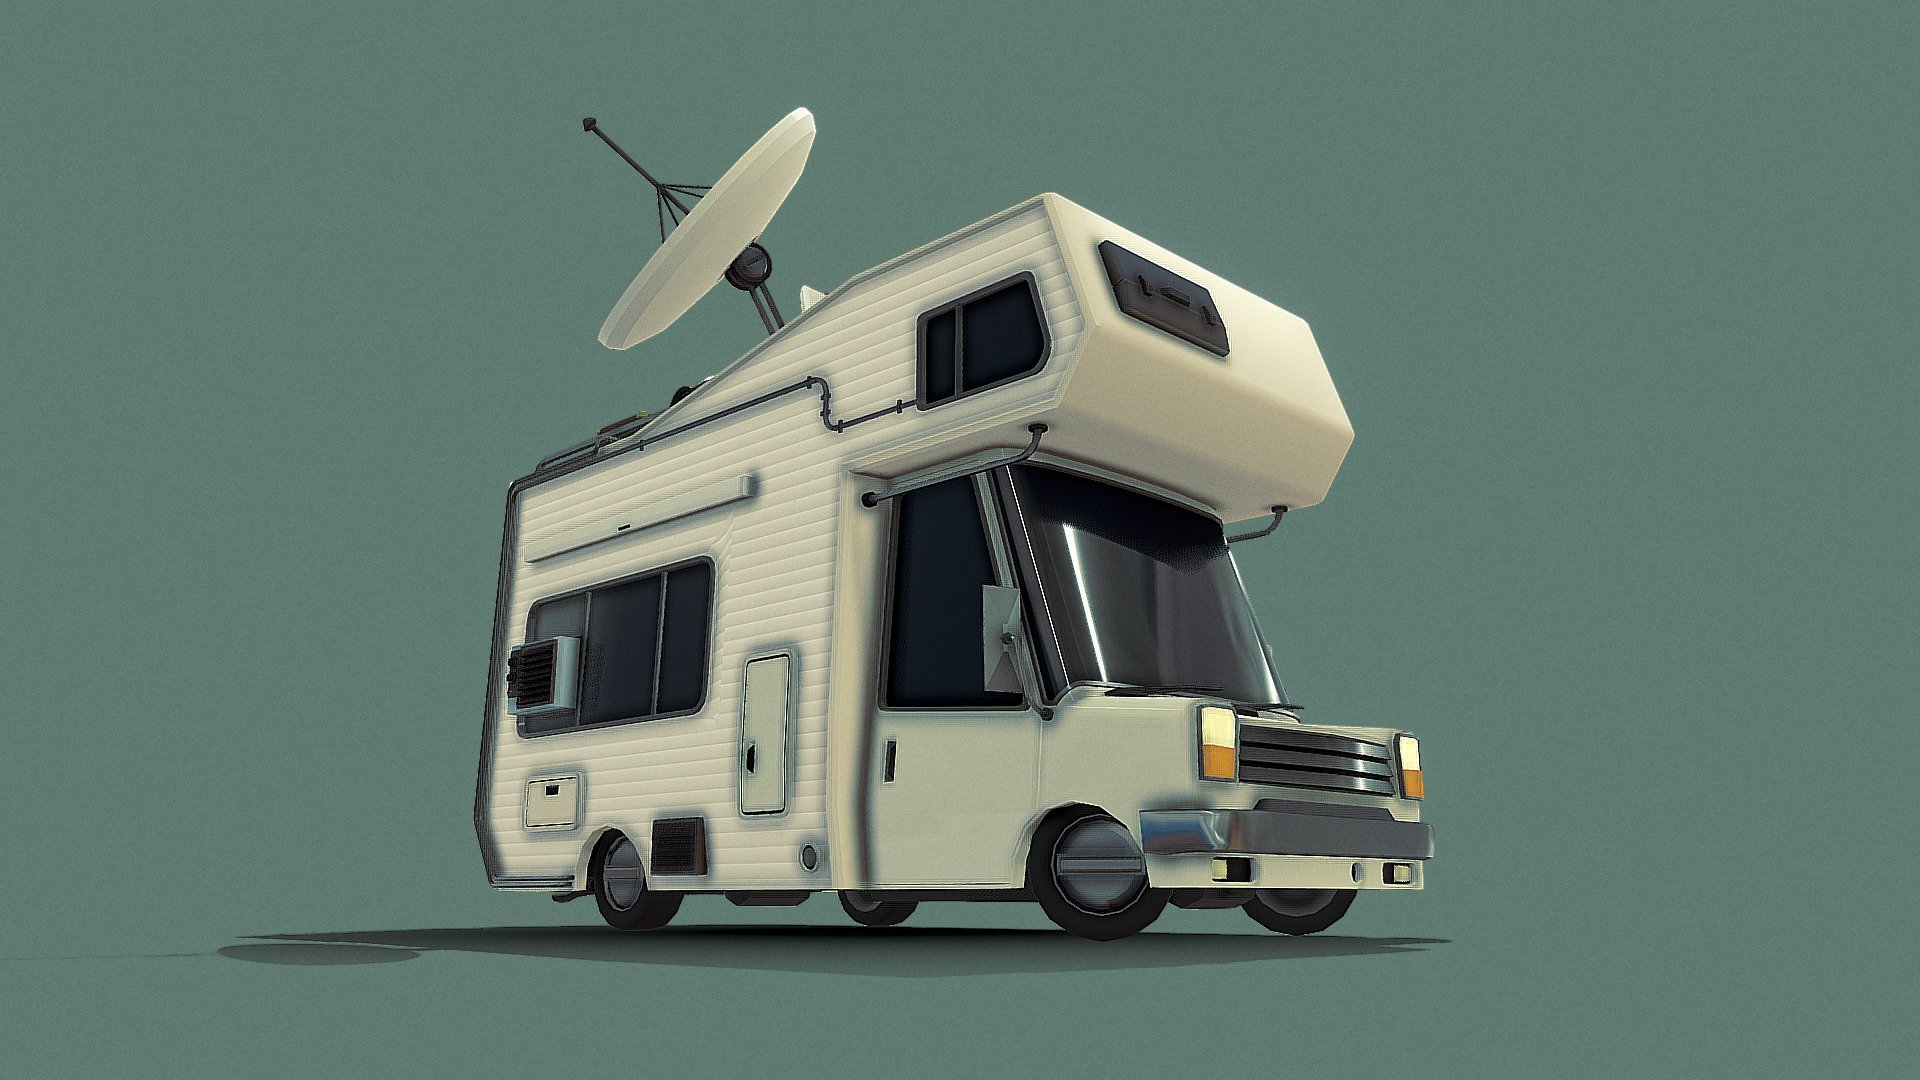 An over the top cartoony overloaded camper van filled with stuff for &ldquo;greeble